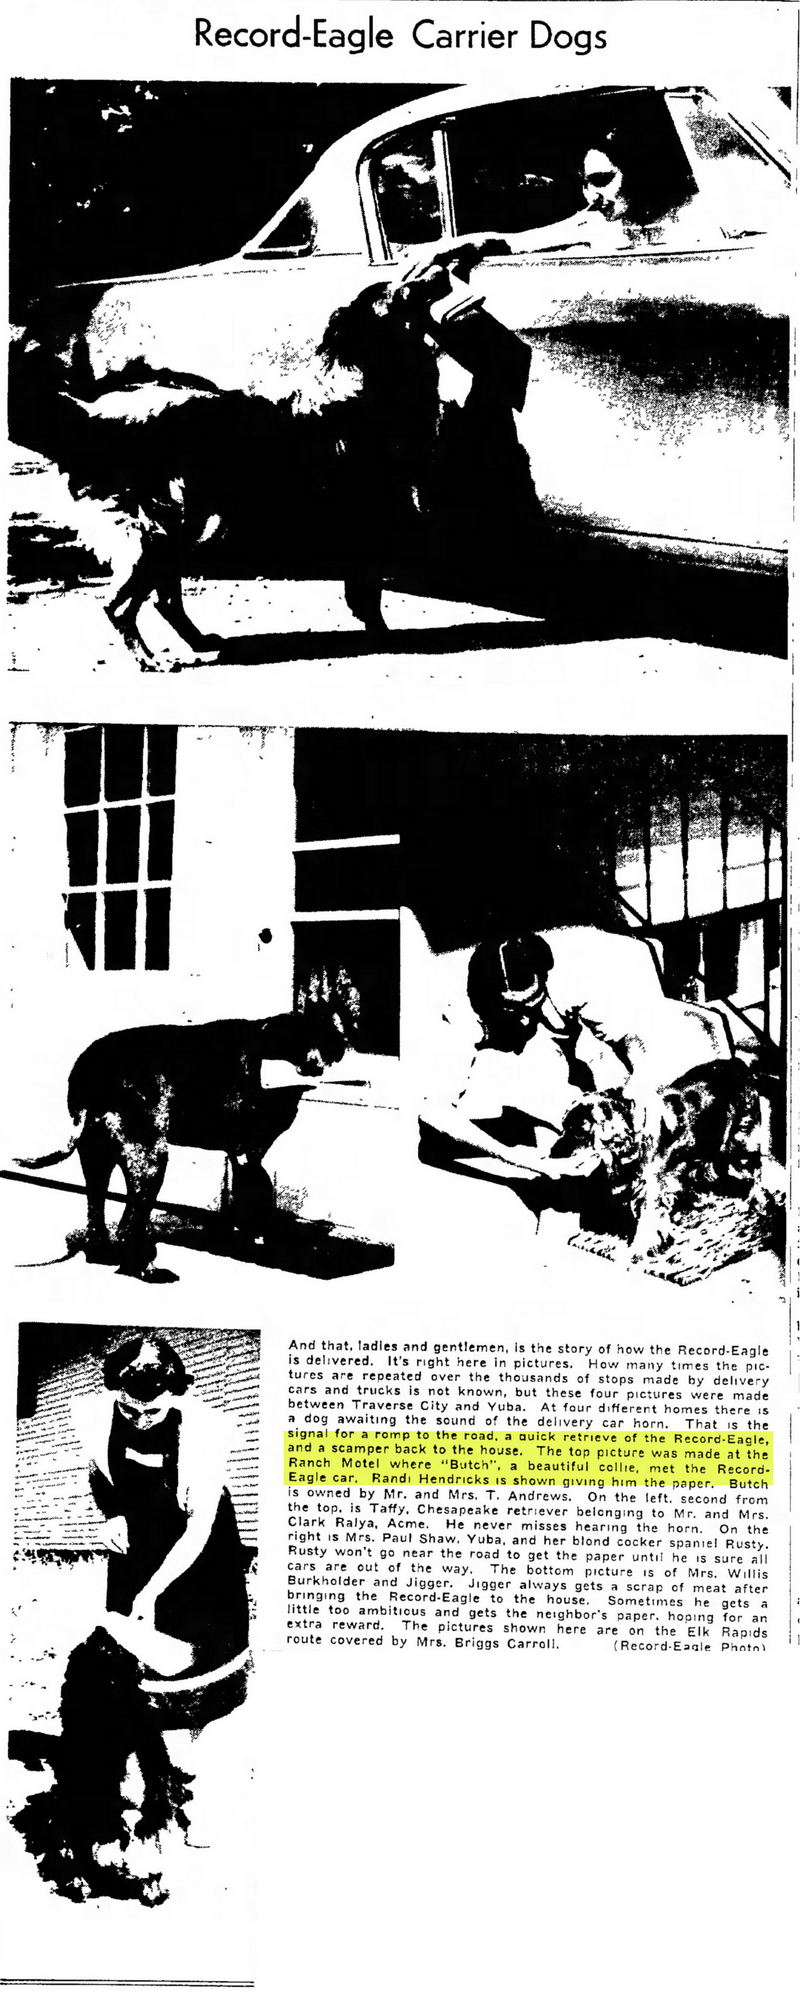 The Ranch Motel - Aug  1954 Article On The Motel And Dog